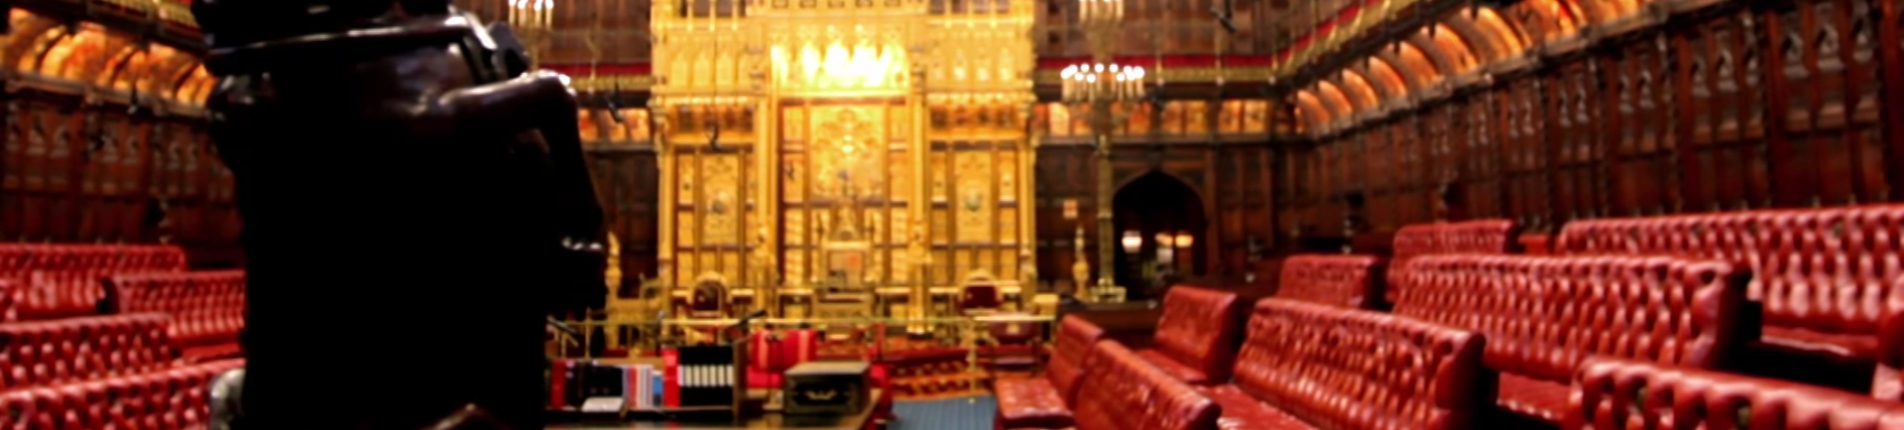 Corporate Insolvency and Governance Bill: Second reading in House of Lords